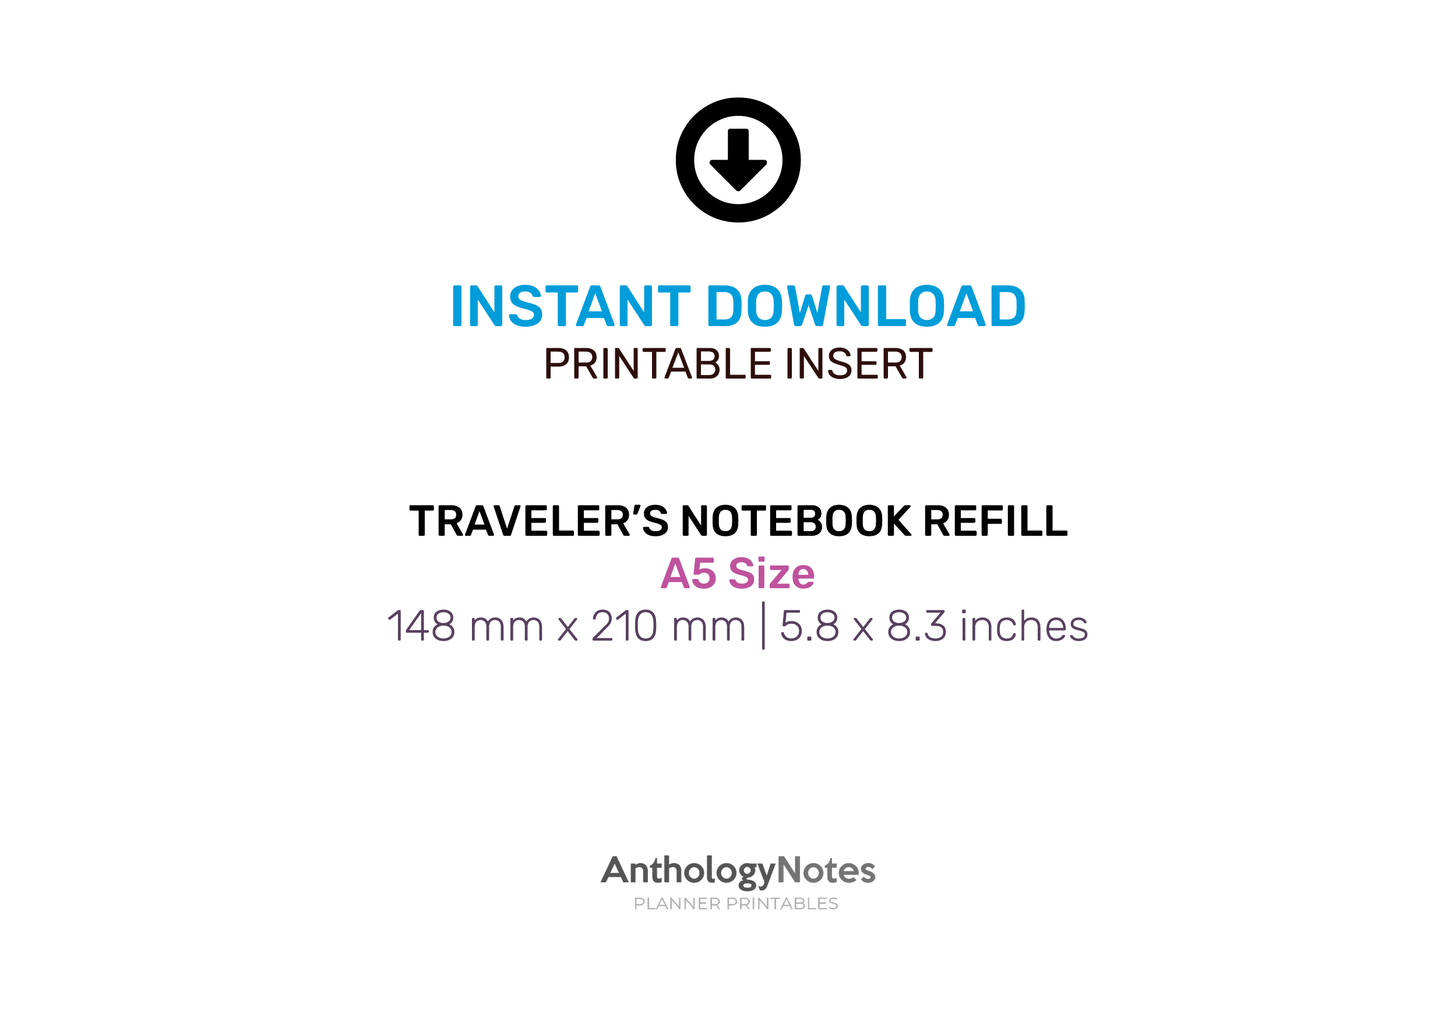 A5 TN Daily View GRID Traveler's Notebook Printable Insert Minimalist, 4 mm x 4 mm and 5 mm x 5 mm A5009